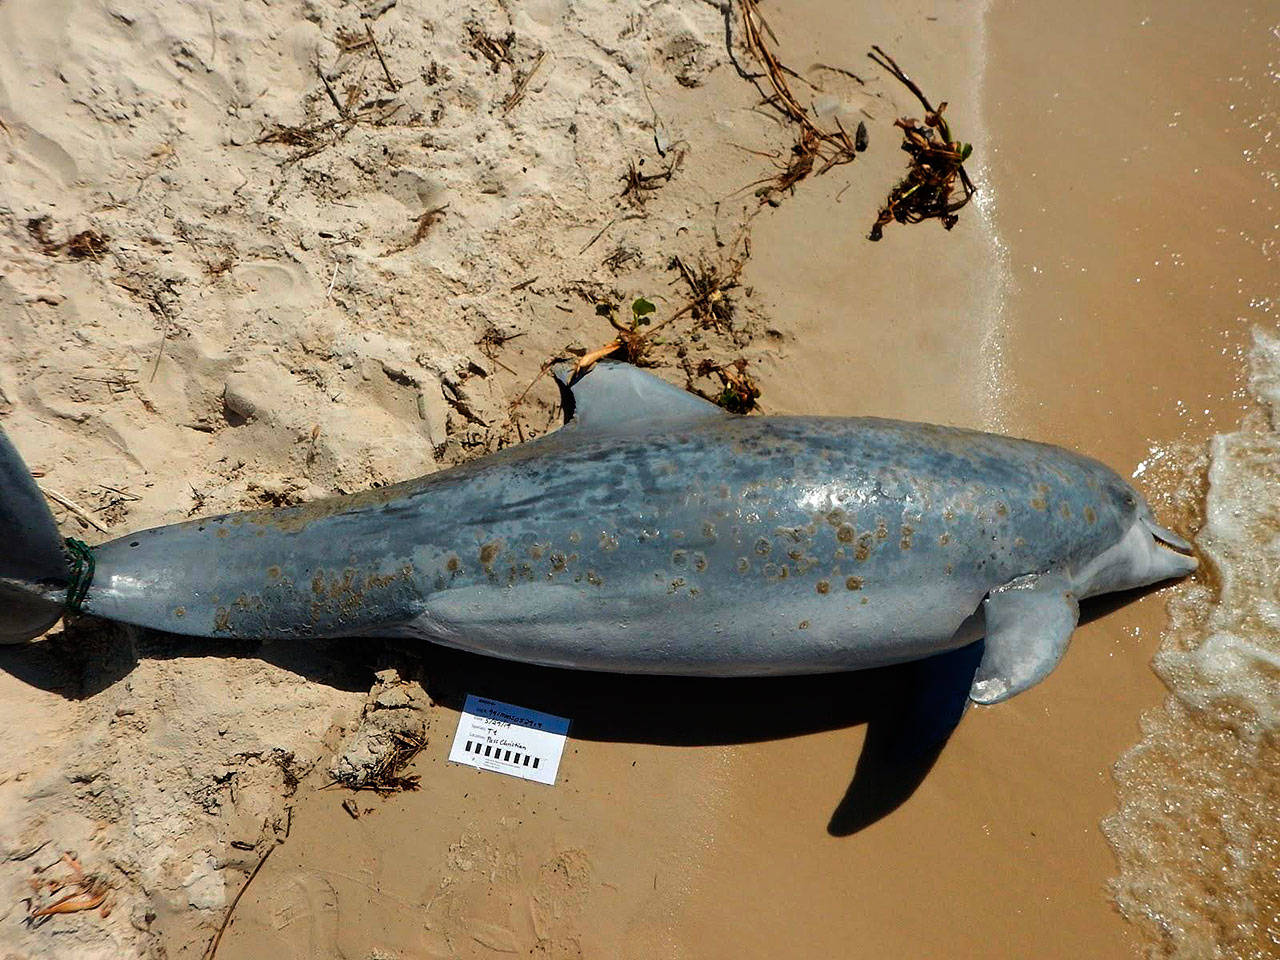 A dolphin with suspected freshwater lesions is one of many that have been washing up on beaches along the Gulf of Mexico. (Institute for Marine Mammal Studies)